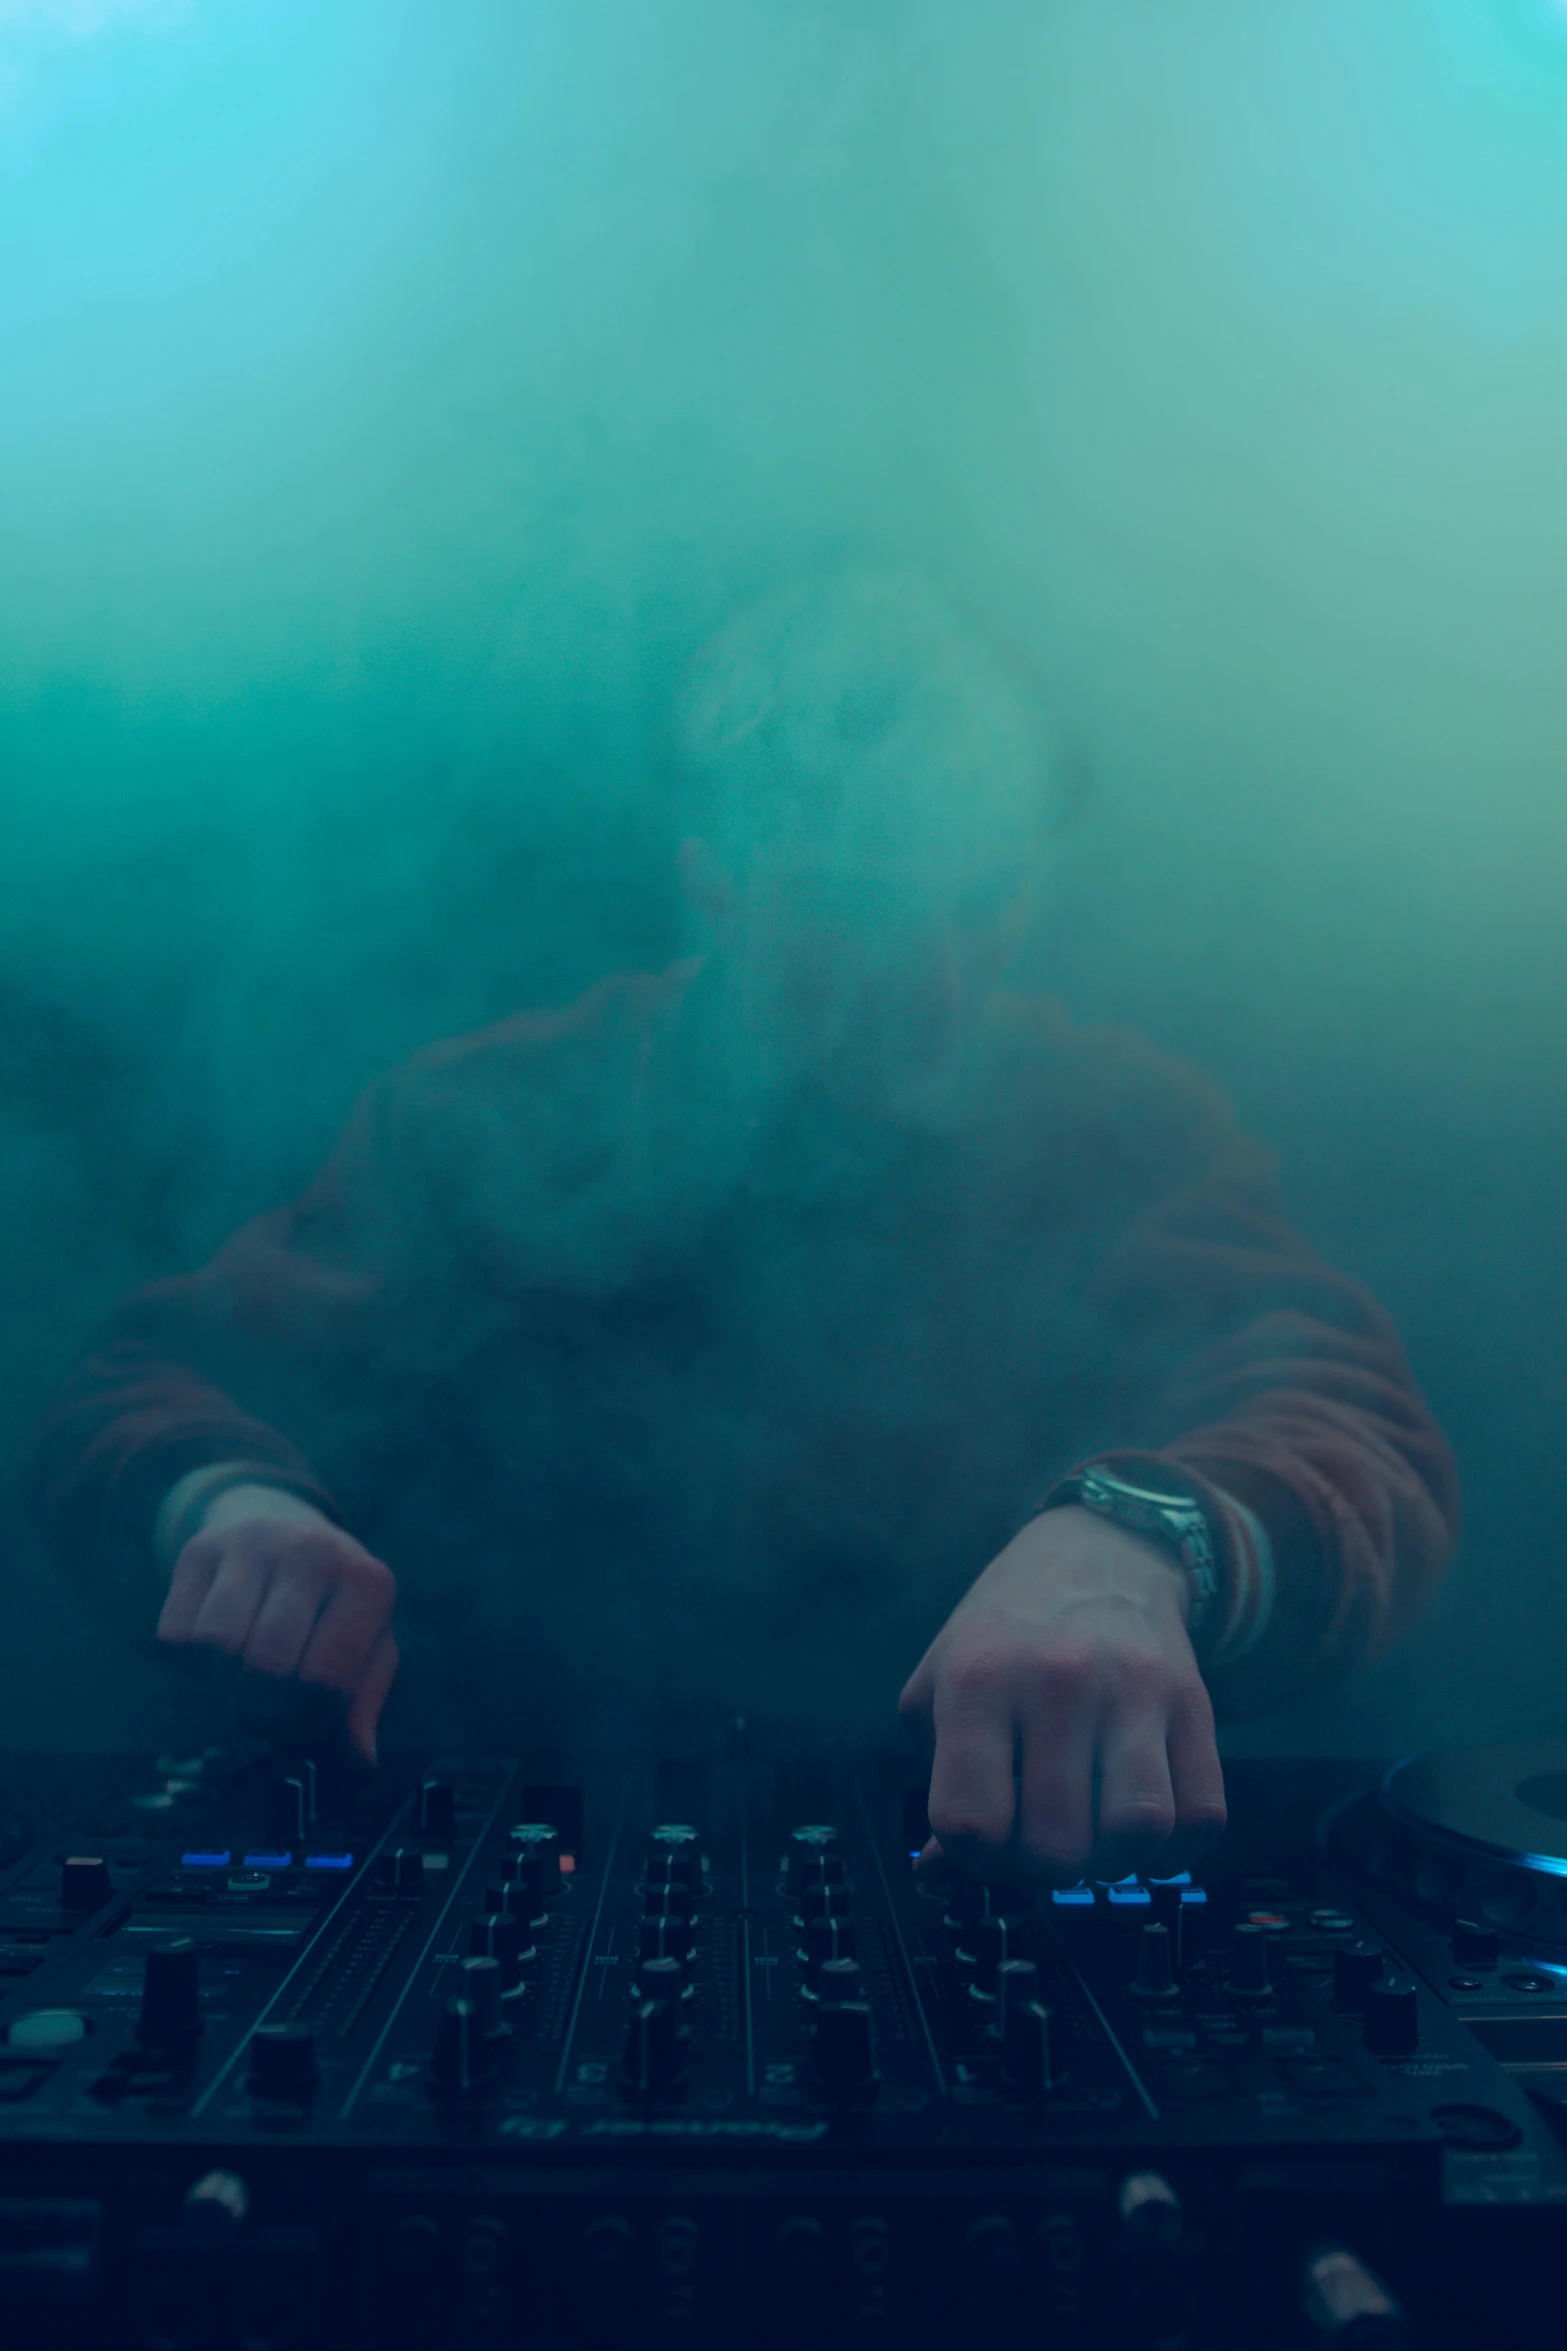 a man playing a music video game on the dj board